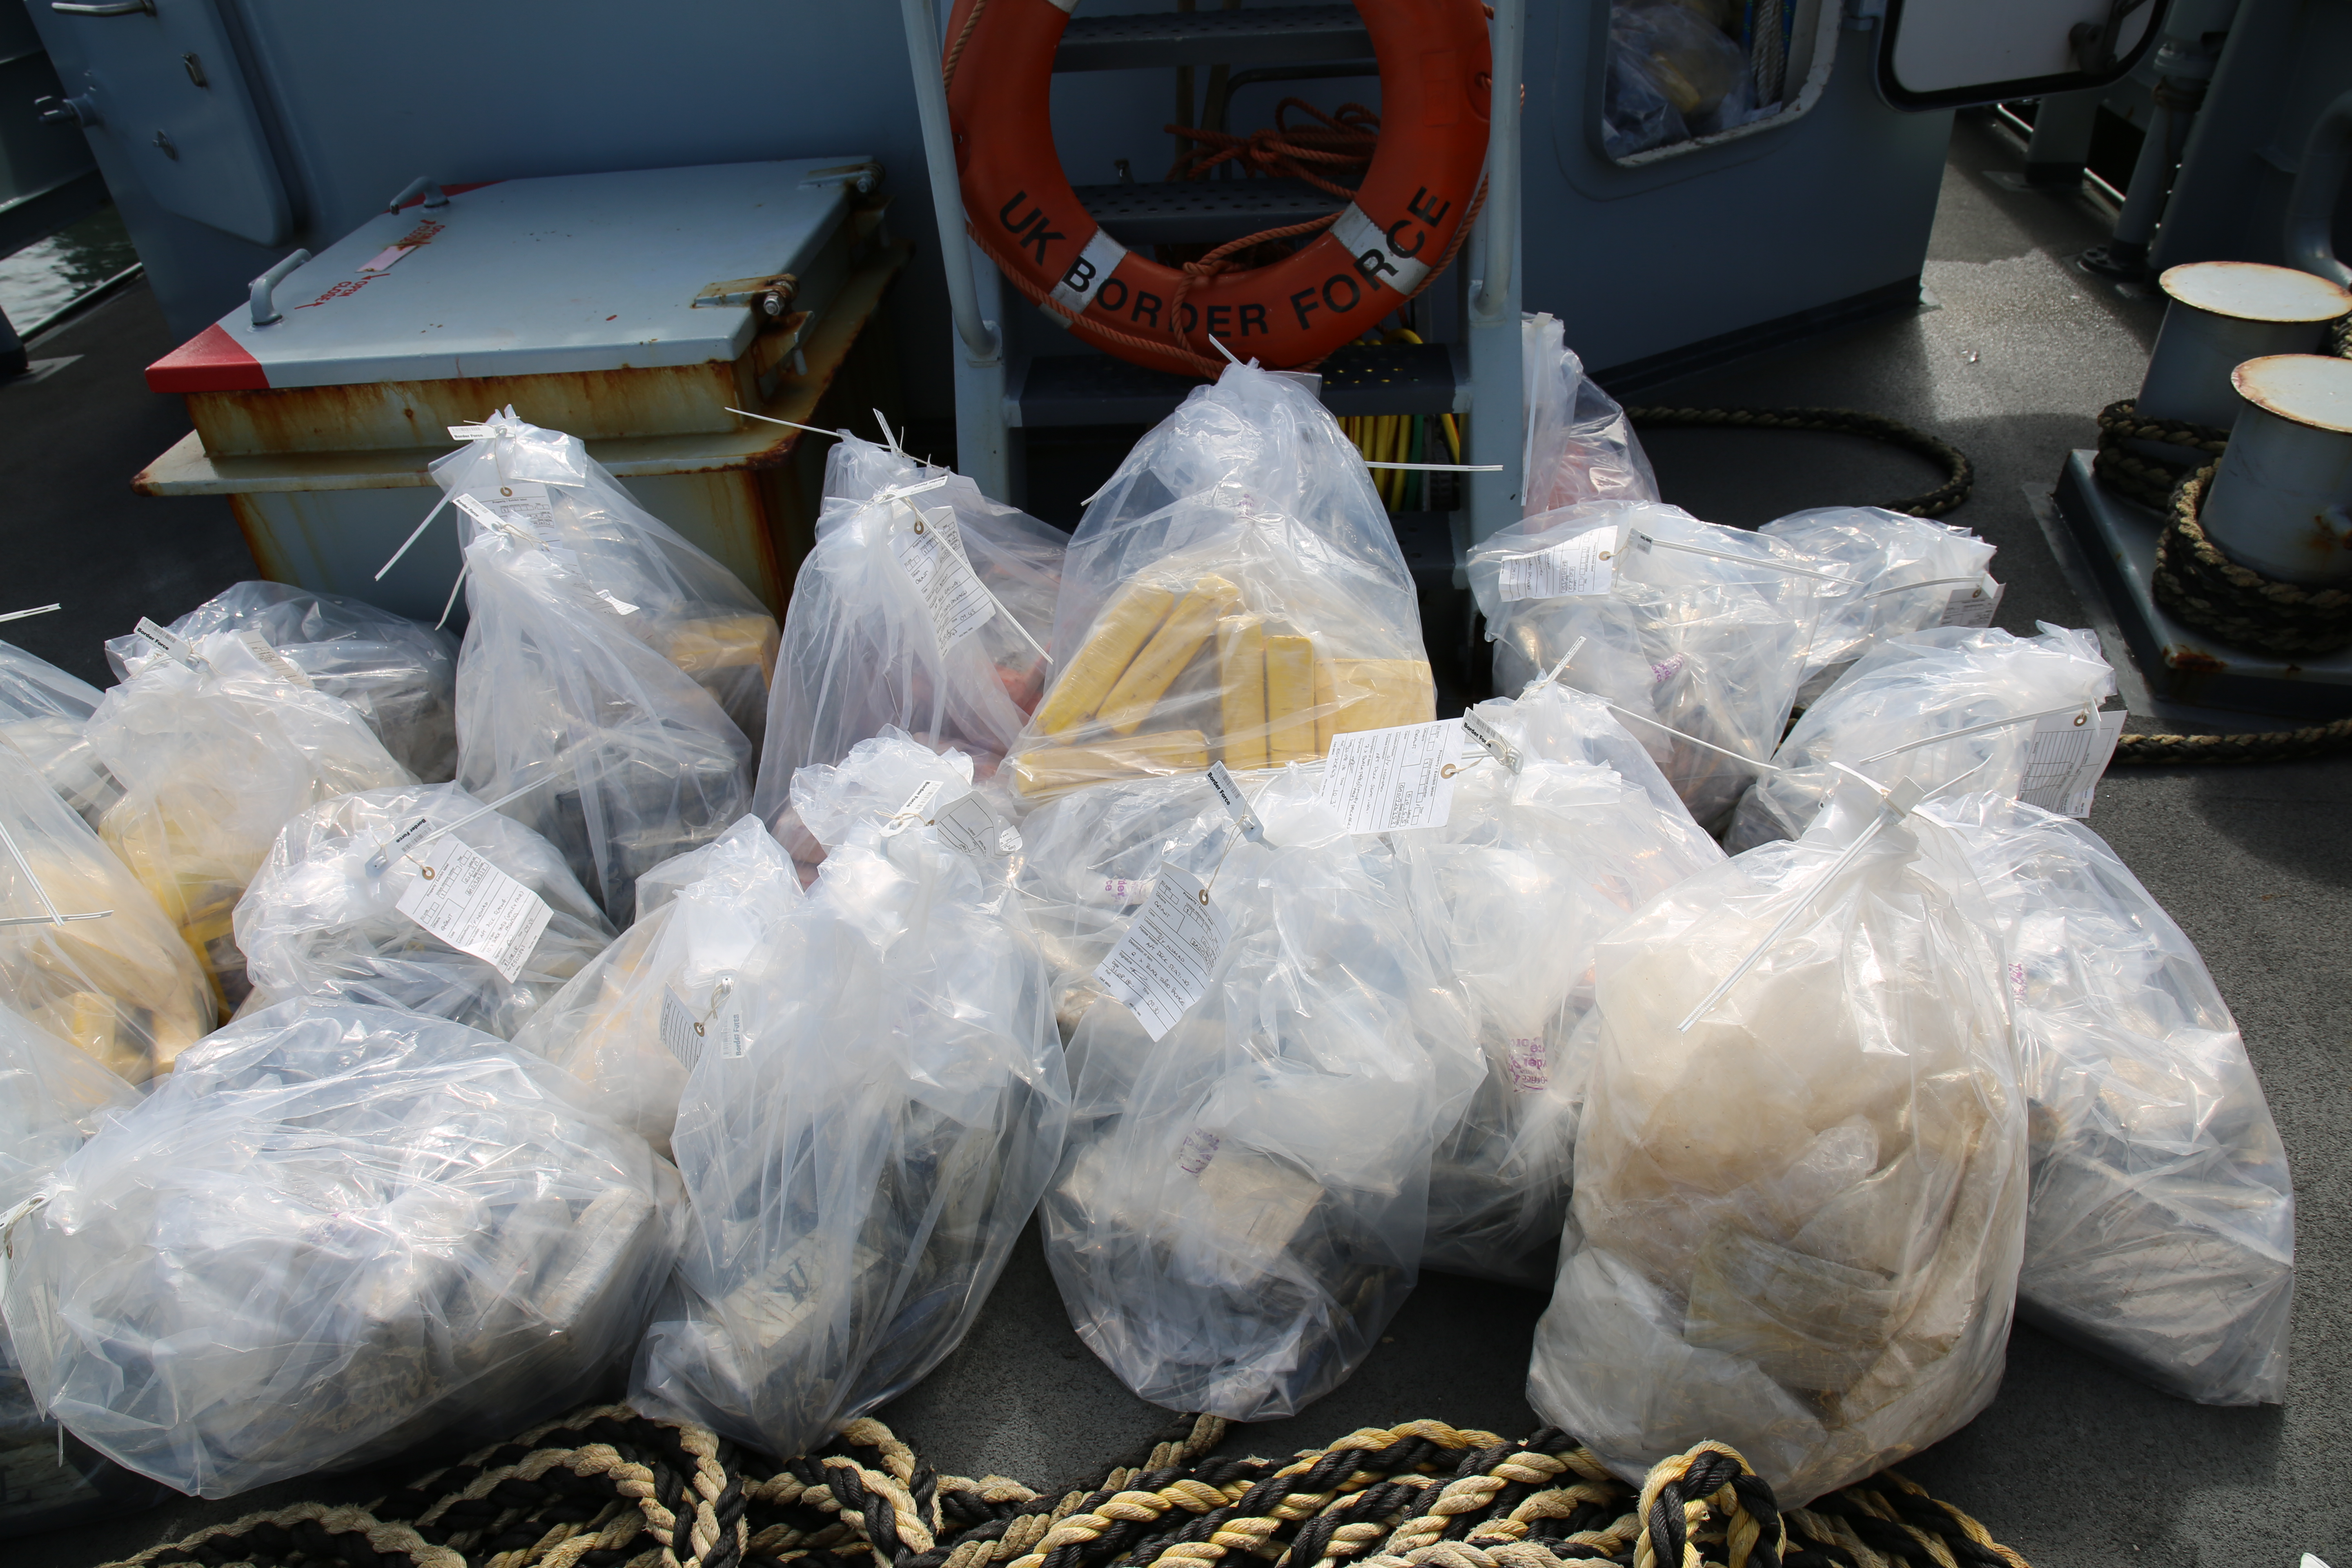 Bags of cocaine seized by the British authorities (National Crime Agency/PA)